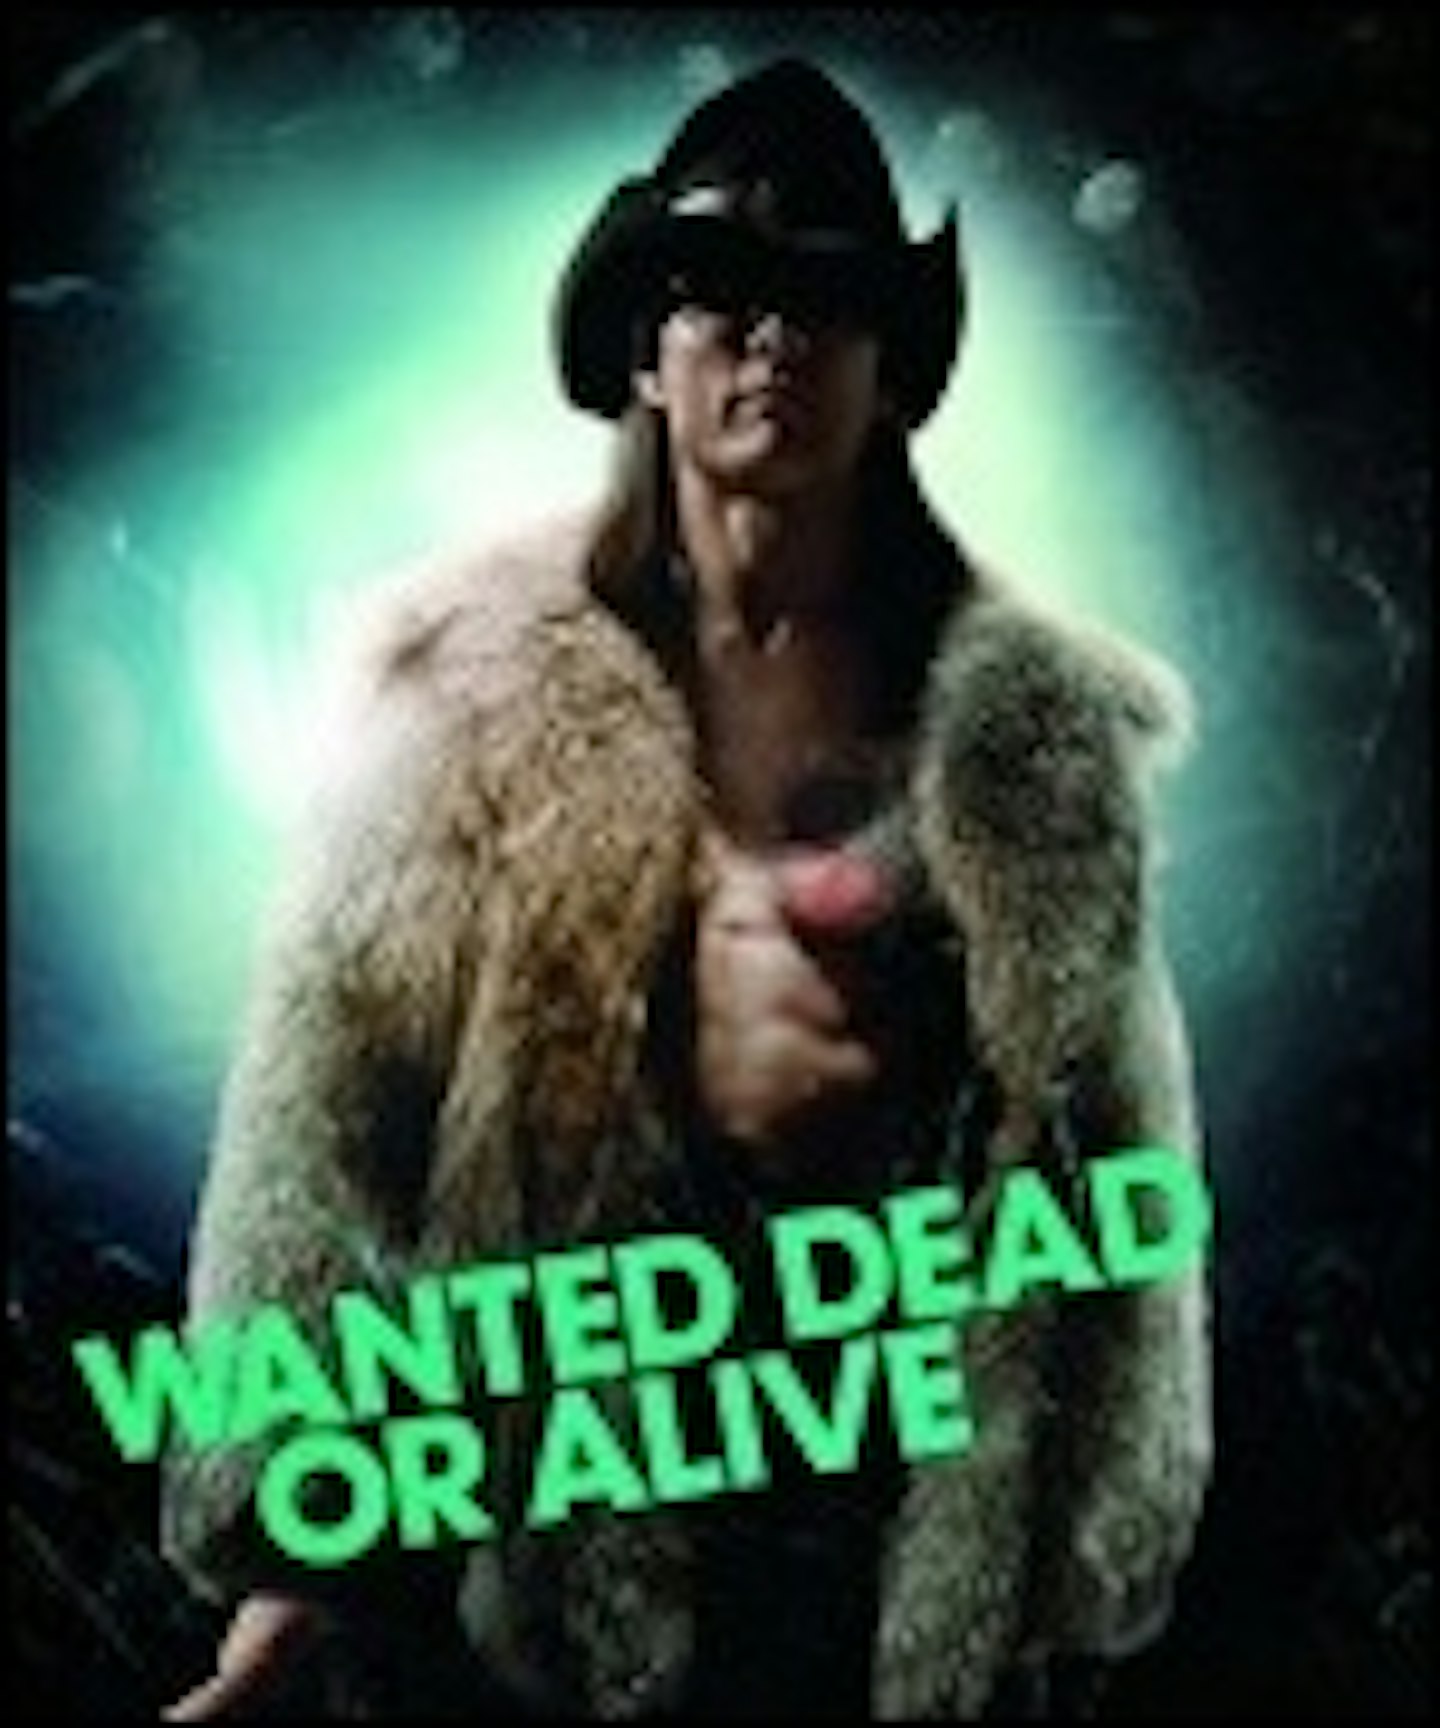 New Rock Of Ages Character Poster